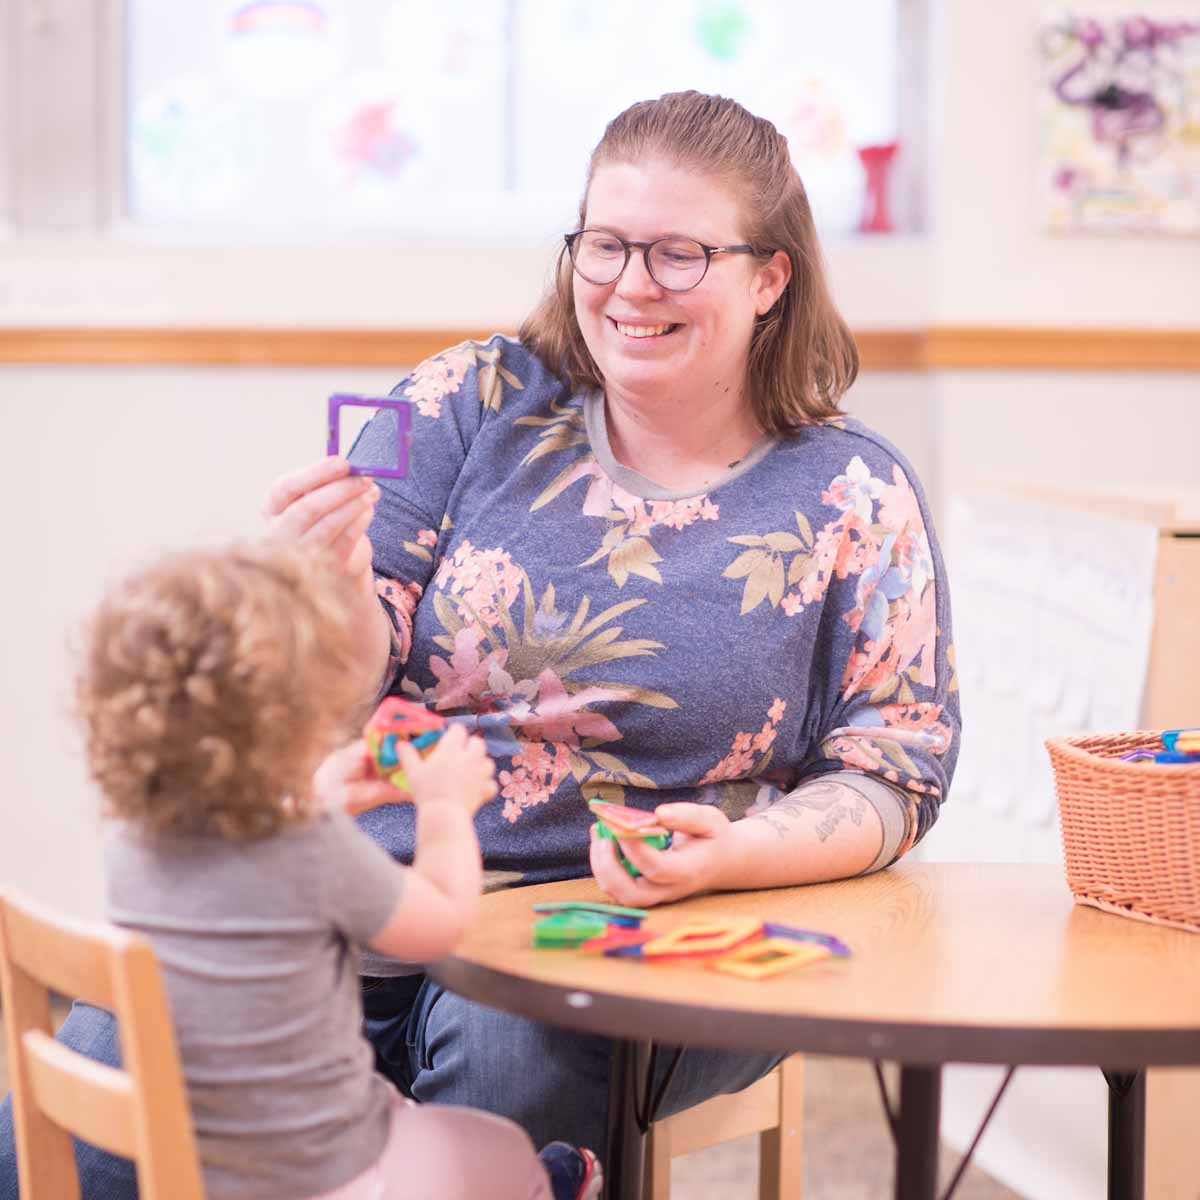 University of Idaho student Leanna Keleher hopes to help families on the Palouse through research on traumatic birth experiences and emergency respite childcare facilities.